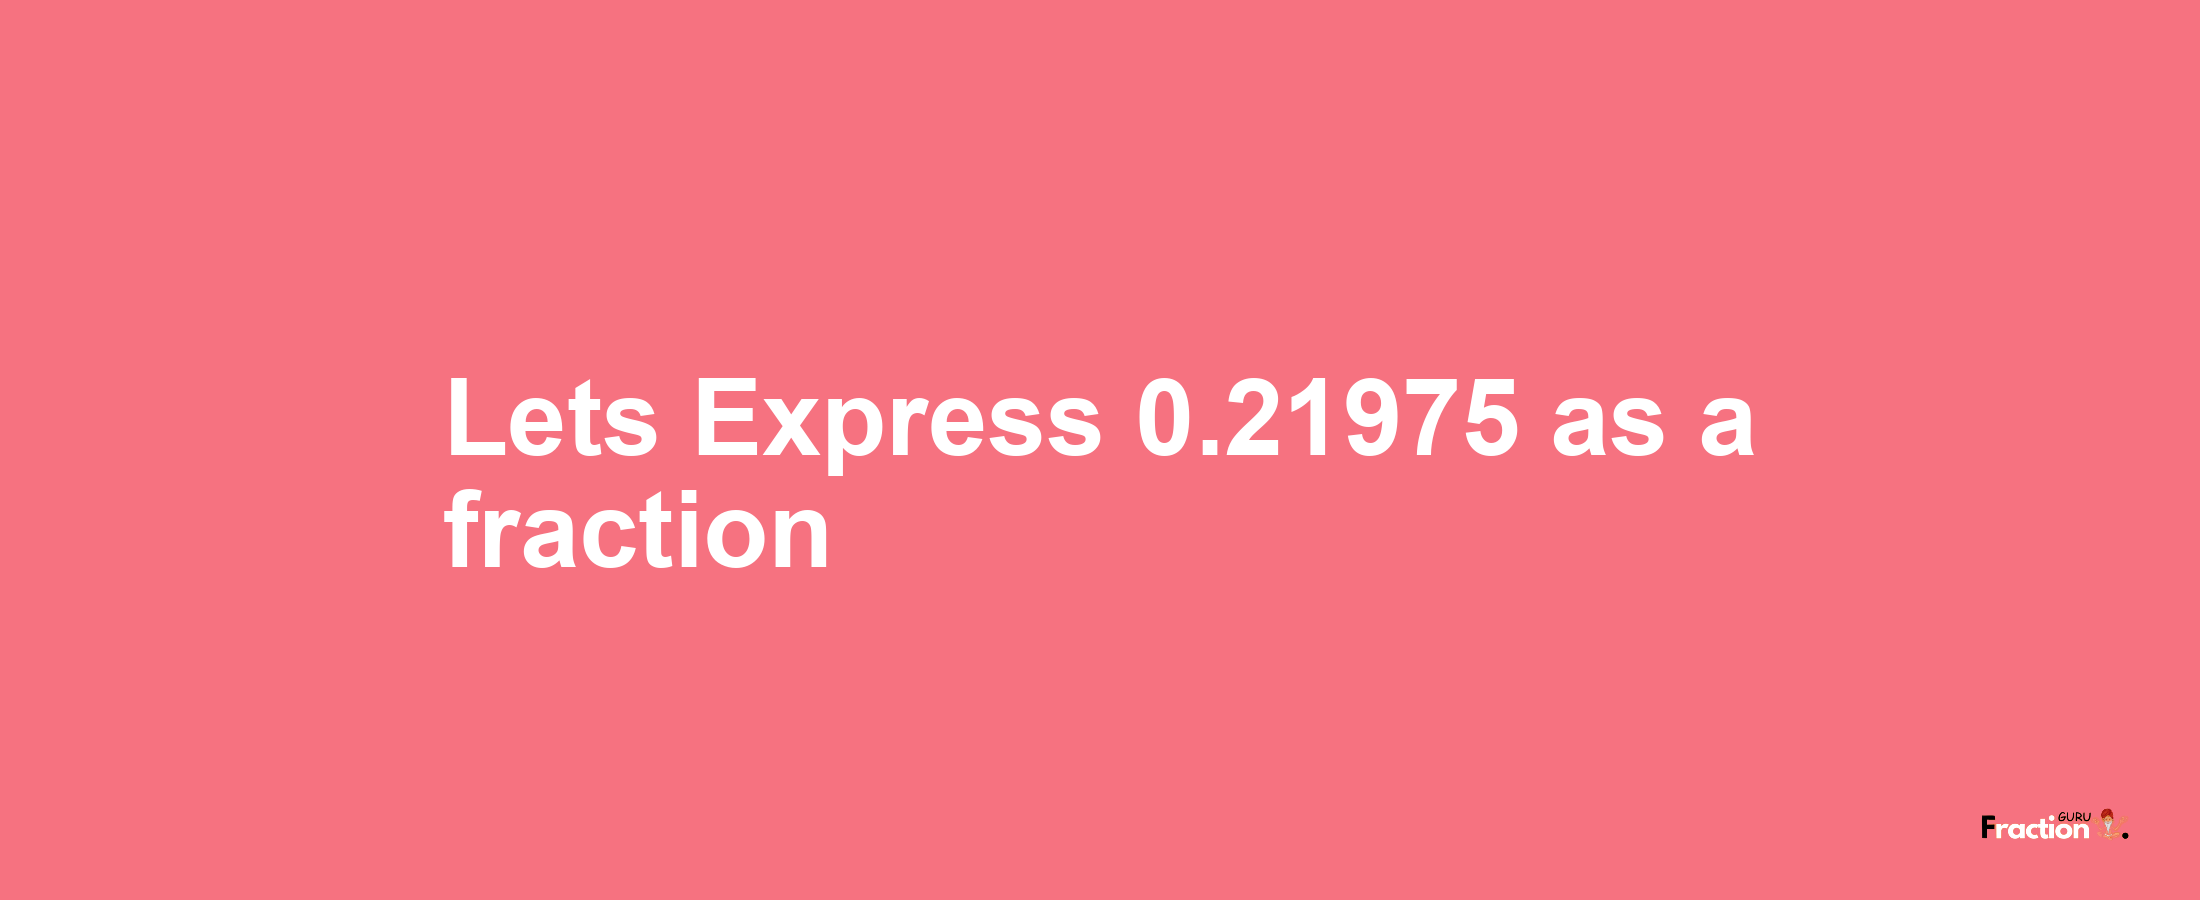 Lets Express 0.21975 as afraction